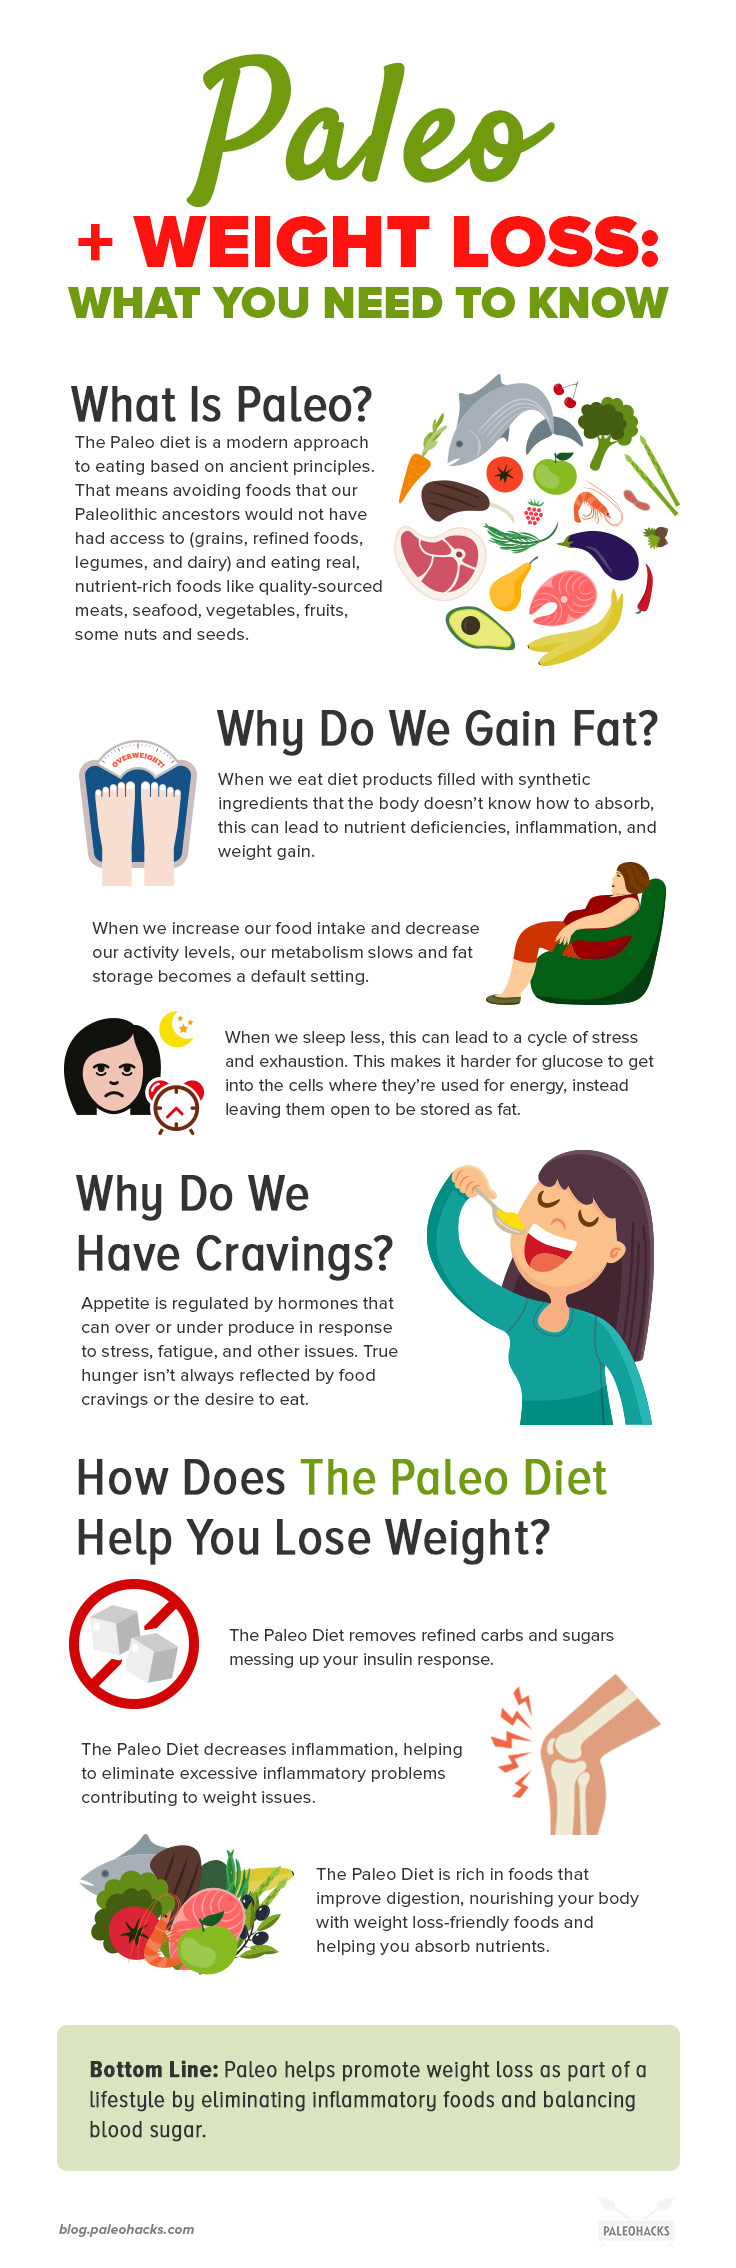 When it comes to Paleo and weight loss, there are no gimmicks. Just like weight gain, weight loss doesn’t happen overnight.